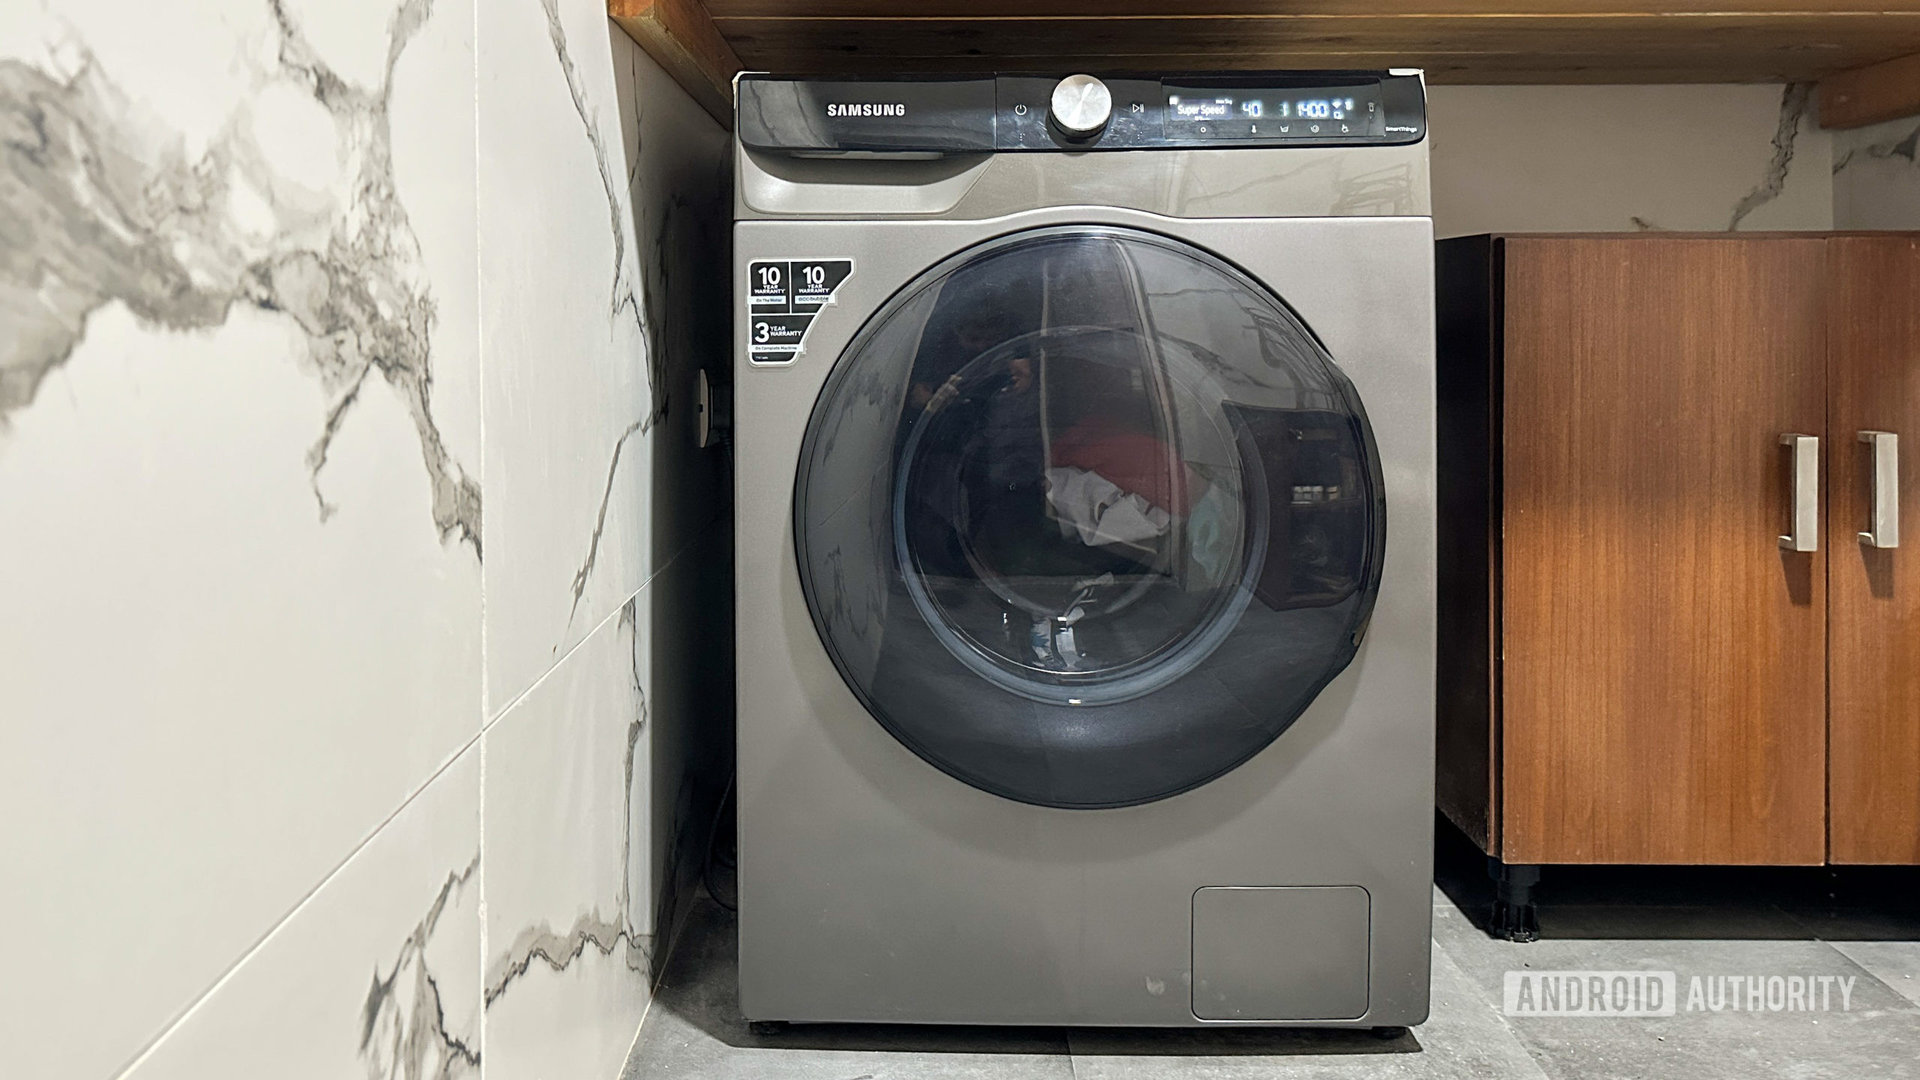 Samsung smart connected washer dryer full image